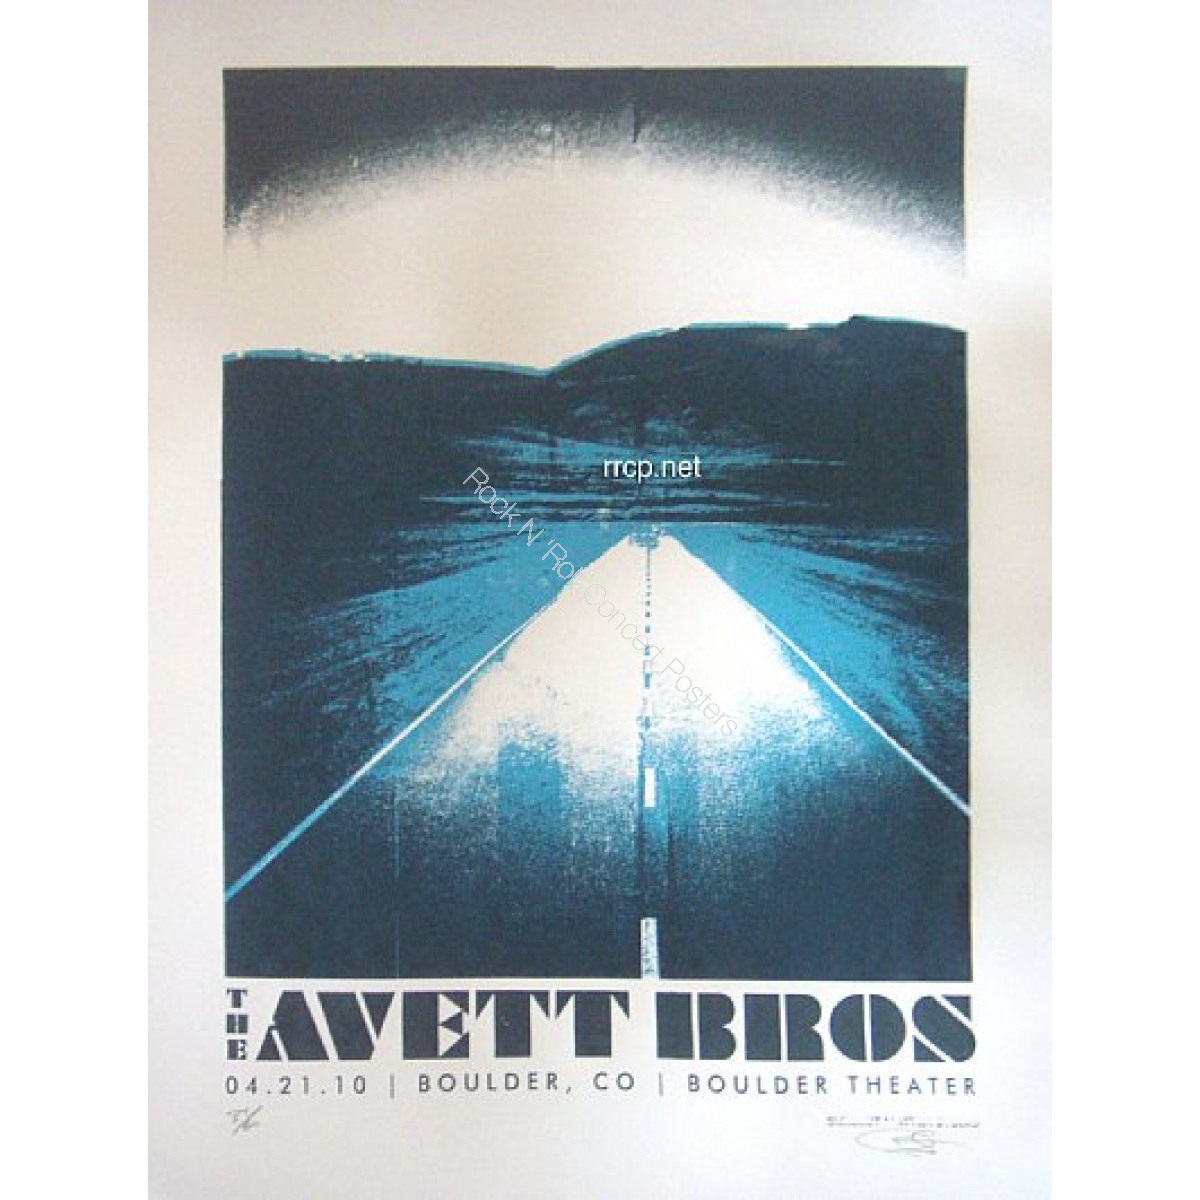 Avett Brothers @ The Boulder Theater 4/21/10 Official Silk Screen Poster S/N Edition of 60